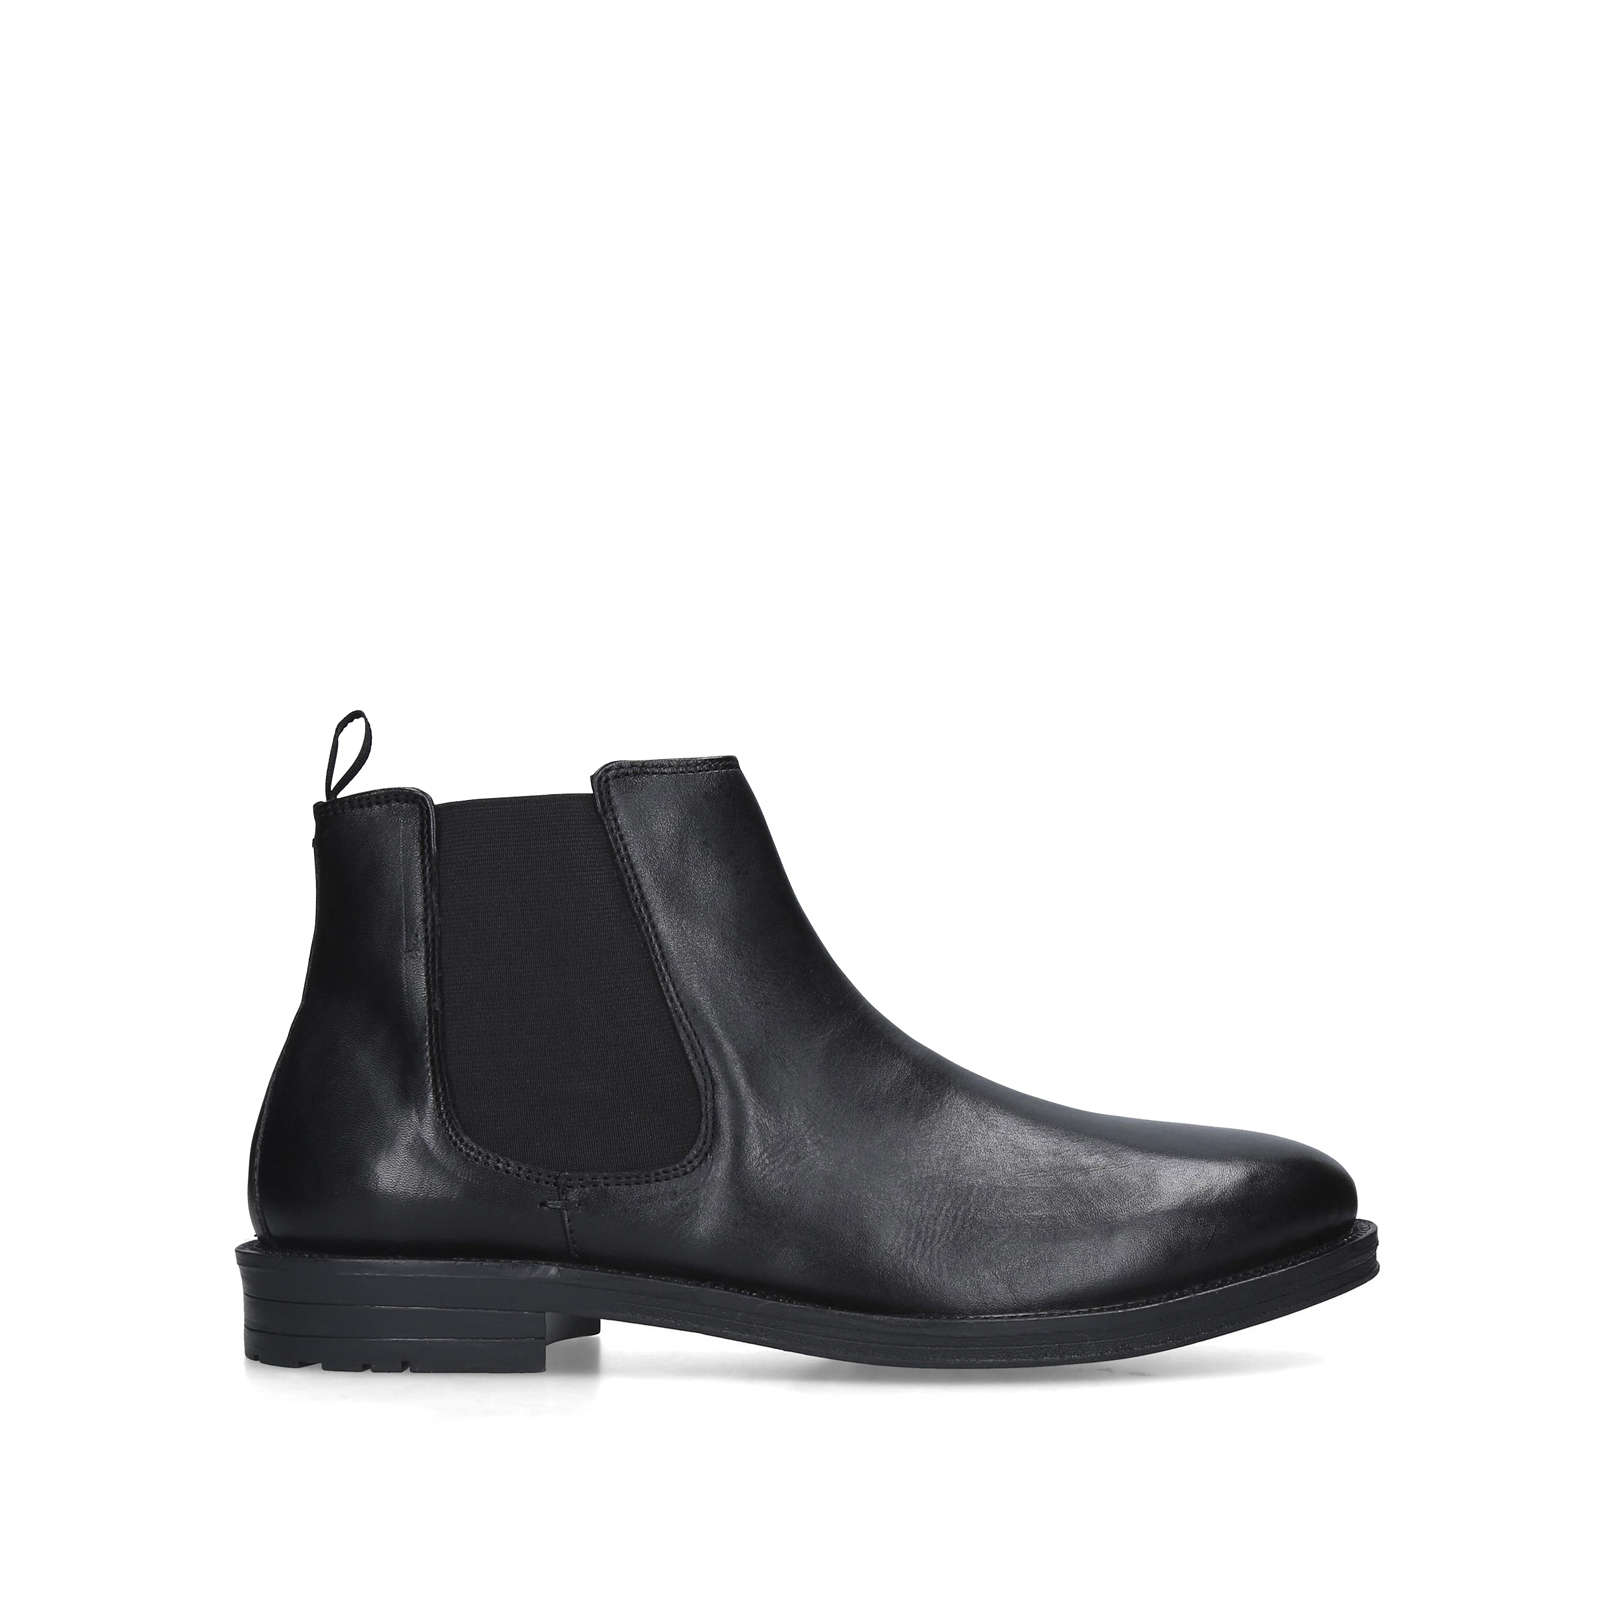 CAVENDISH - SILVER STREET Boots